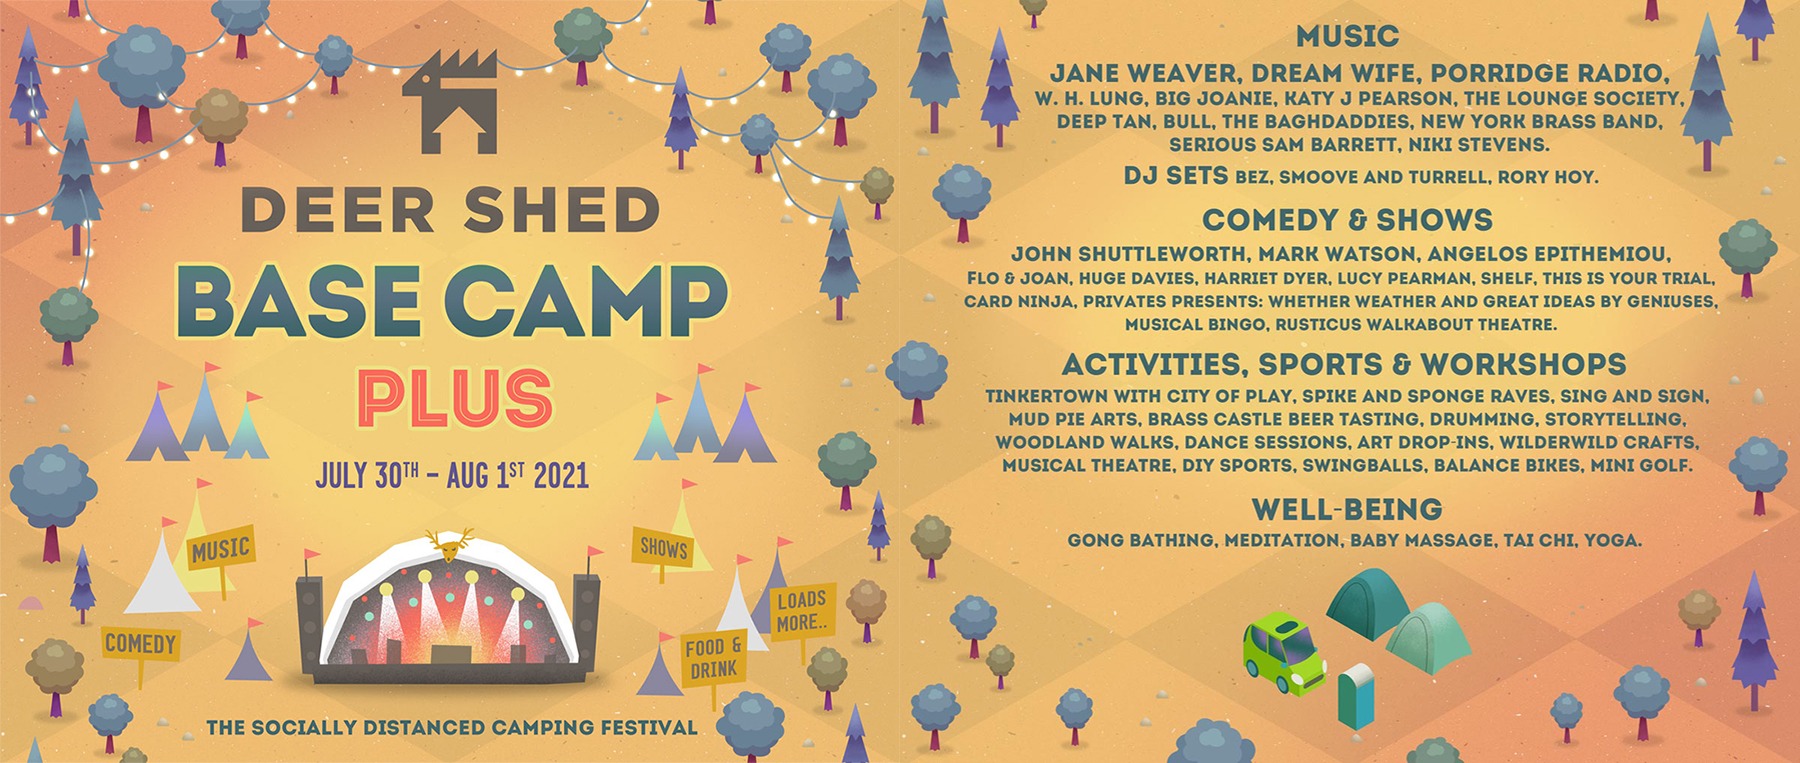 NEWS: details announced for Deer Shed: Base Camp Plus